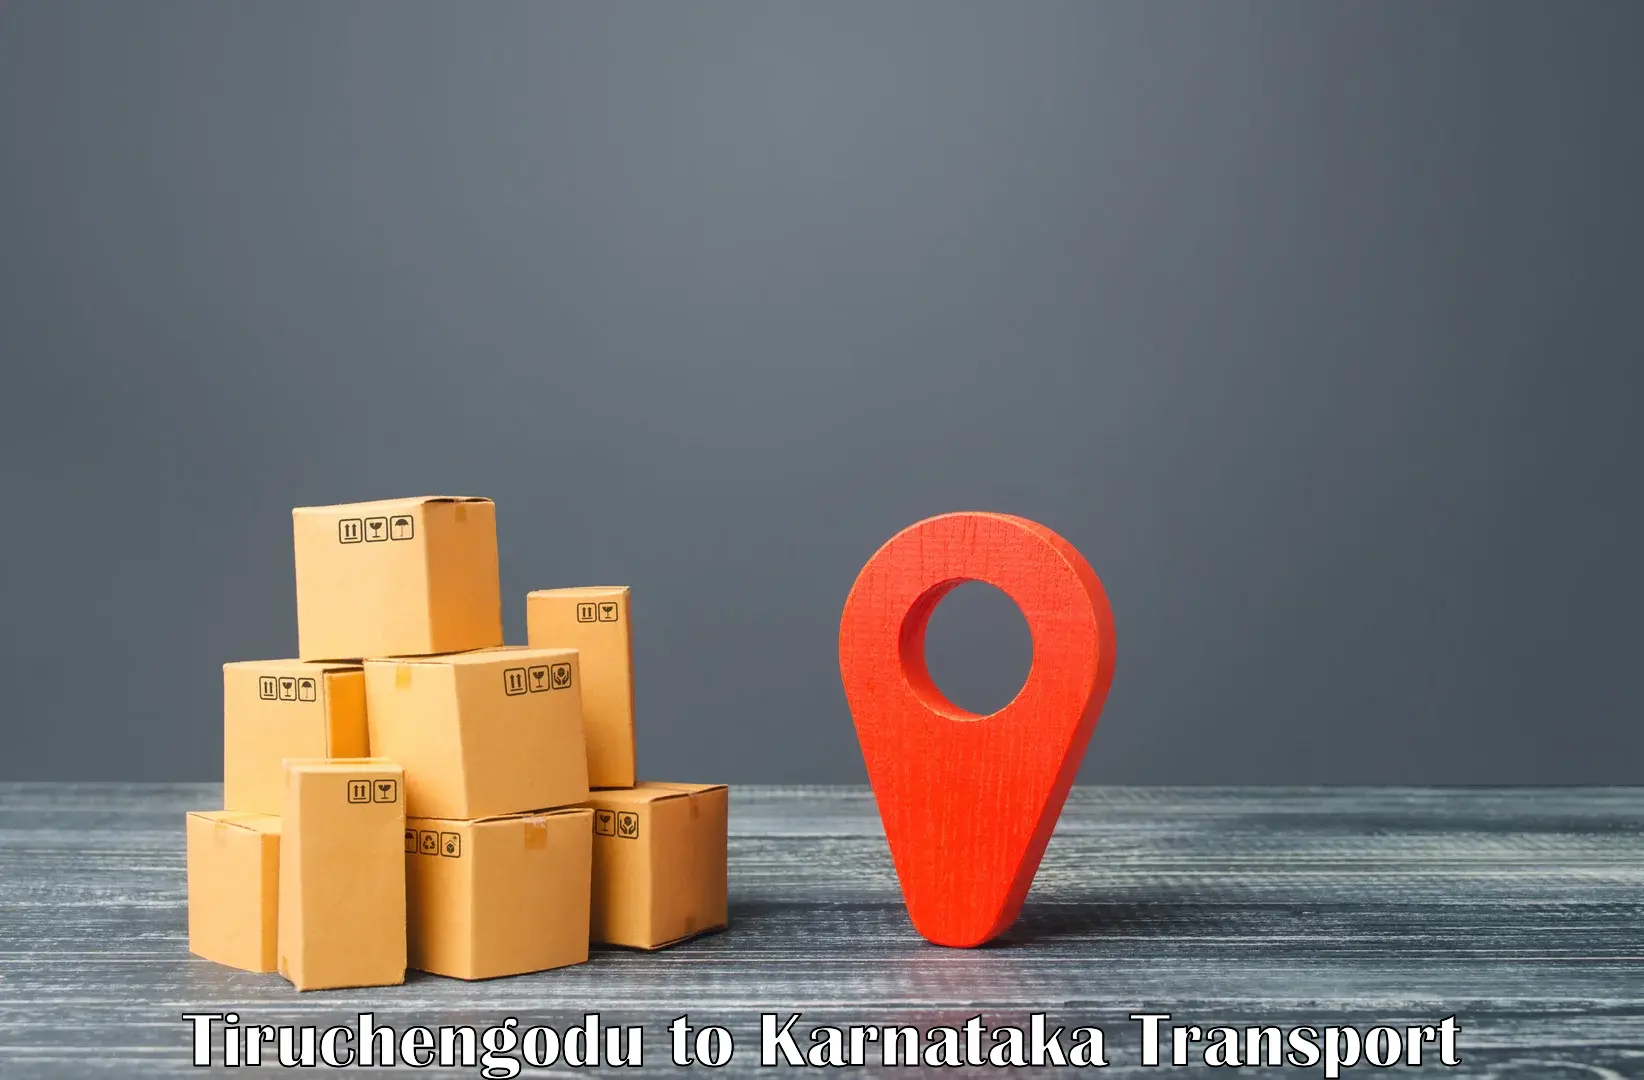 Daily parcel service transport in Tiruchengodu to Bangalore